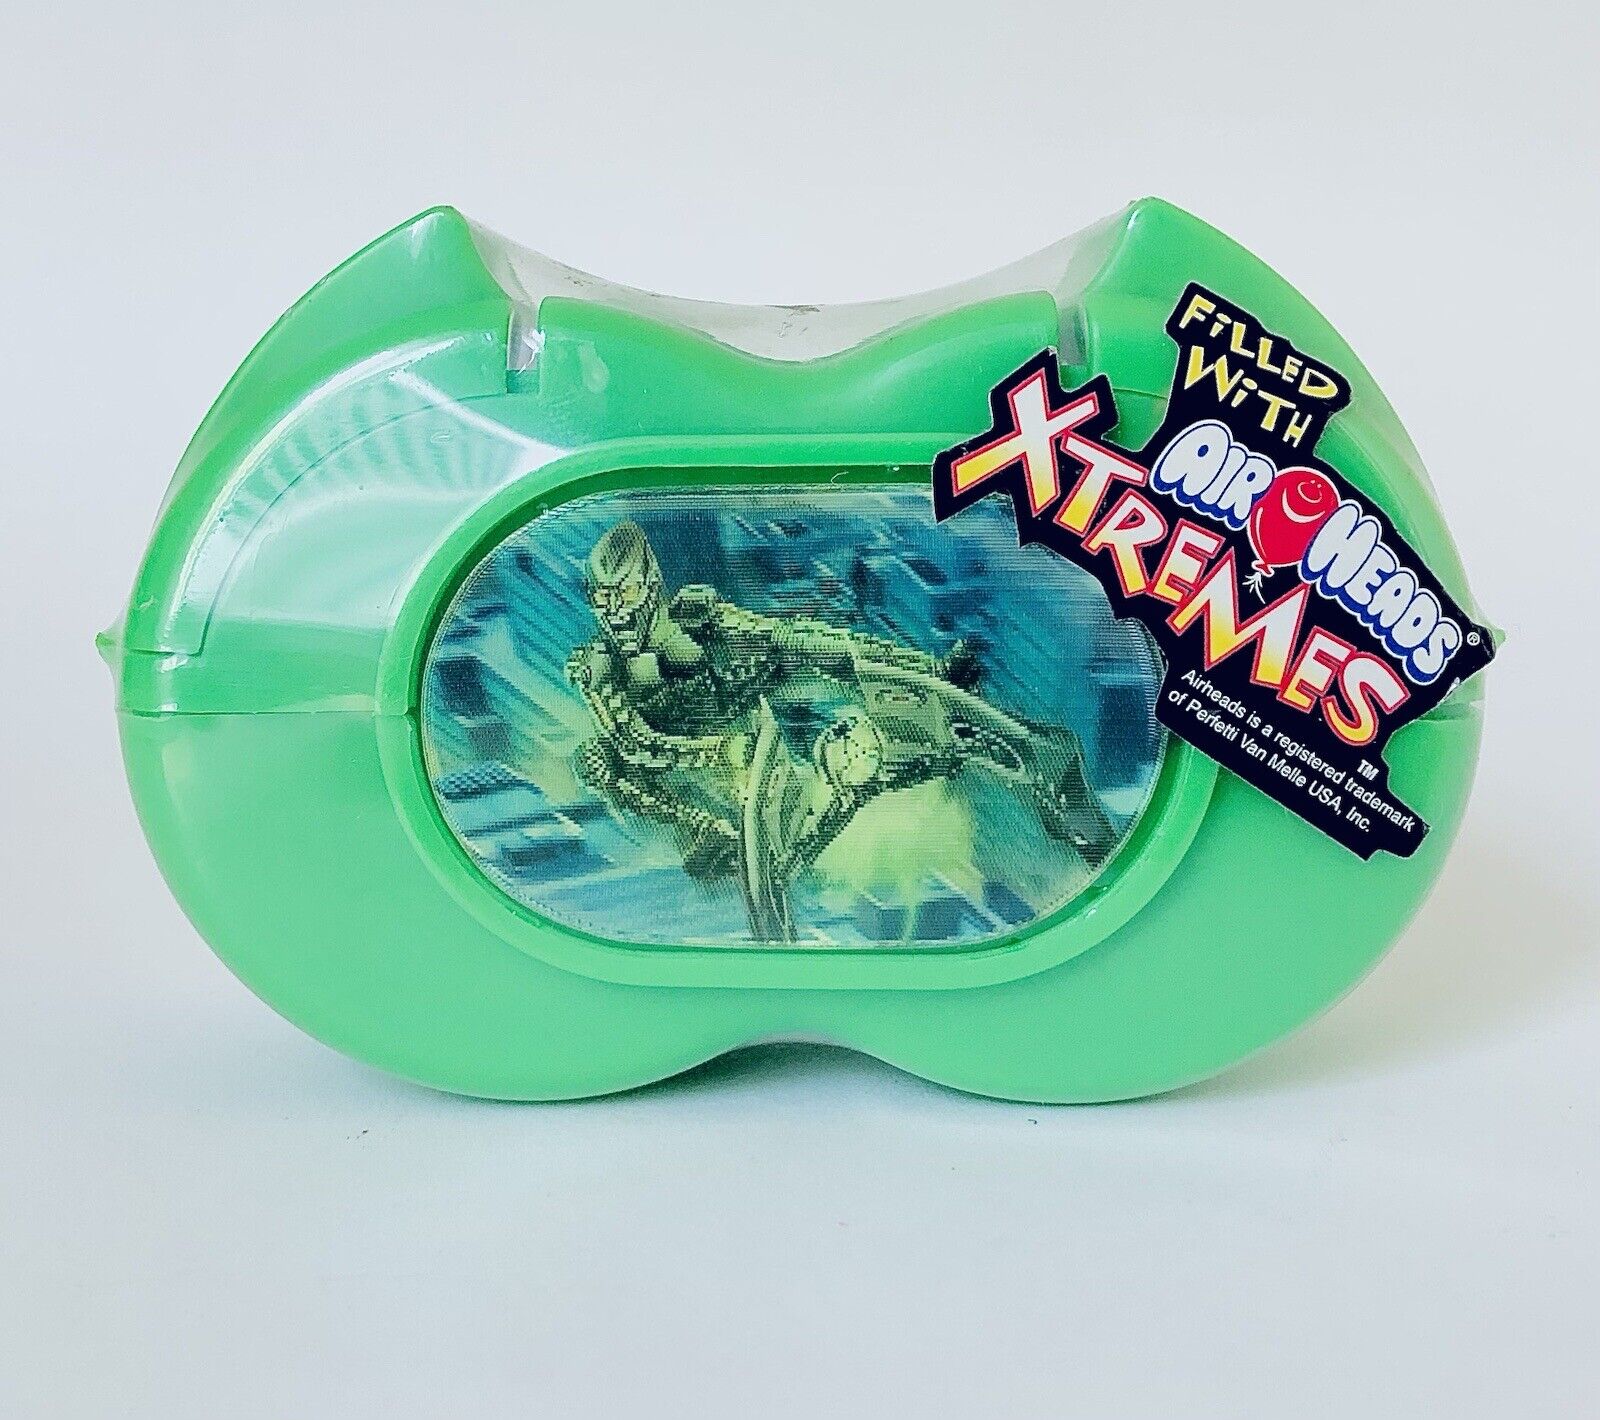 Vintage 2002 Flix GREEN GOBLIN Airheads Extreme Candy 4.5” Container